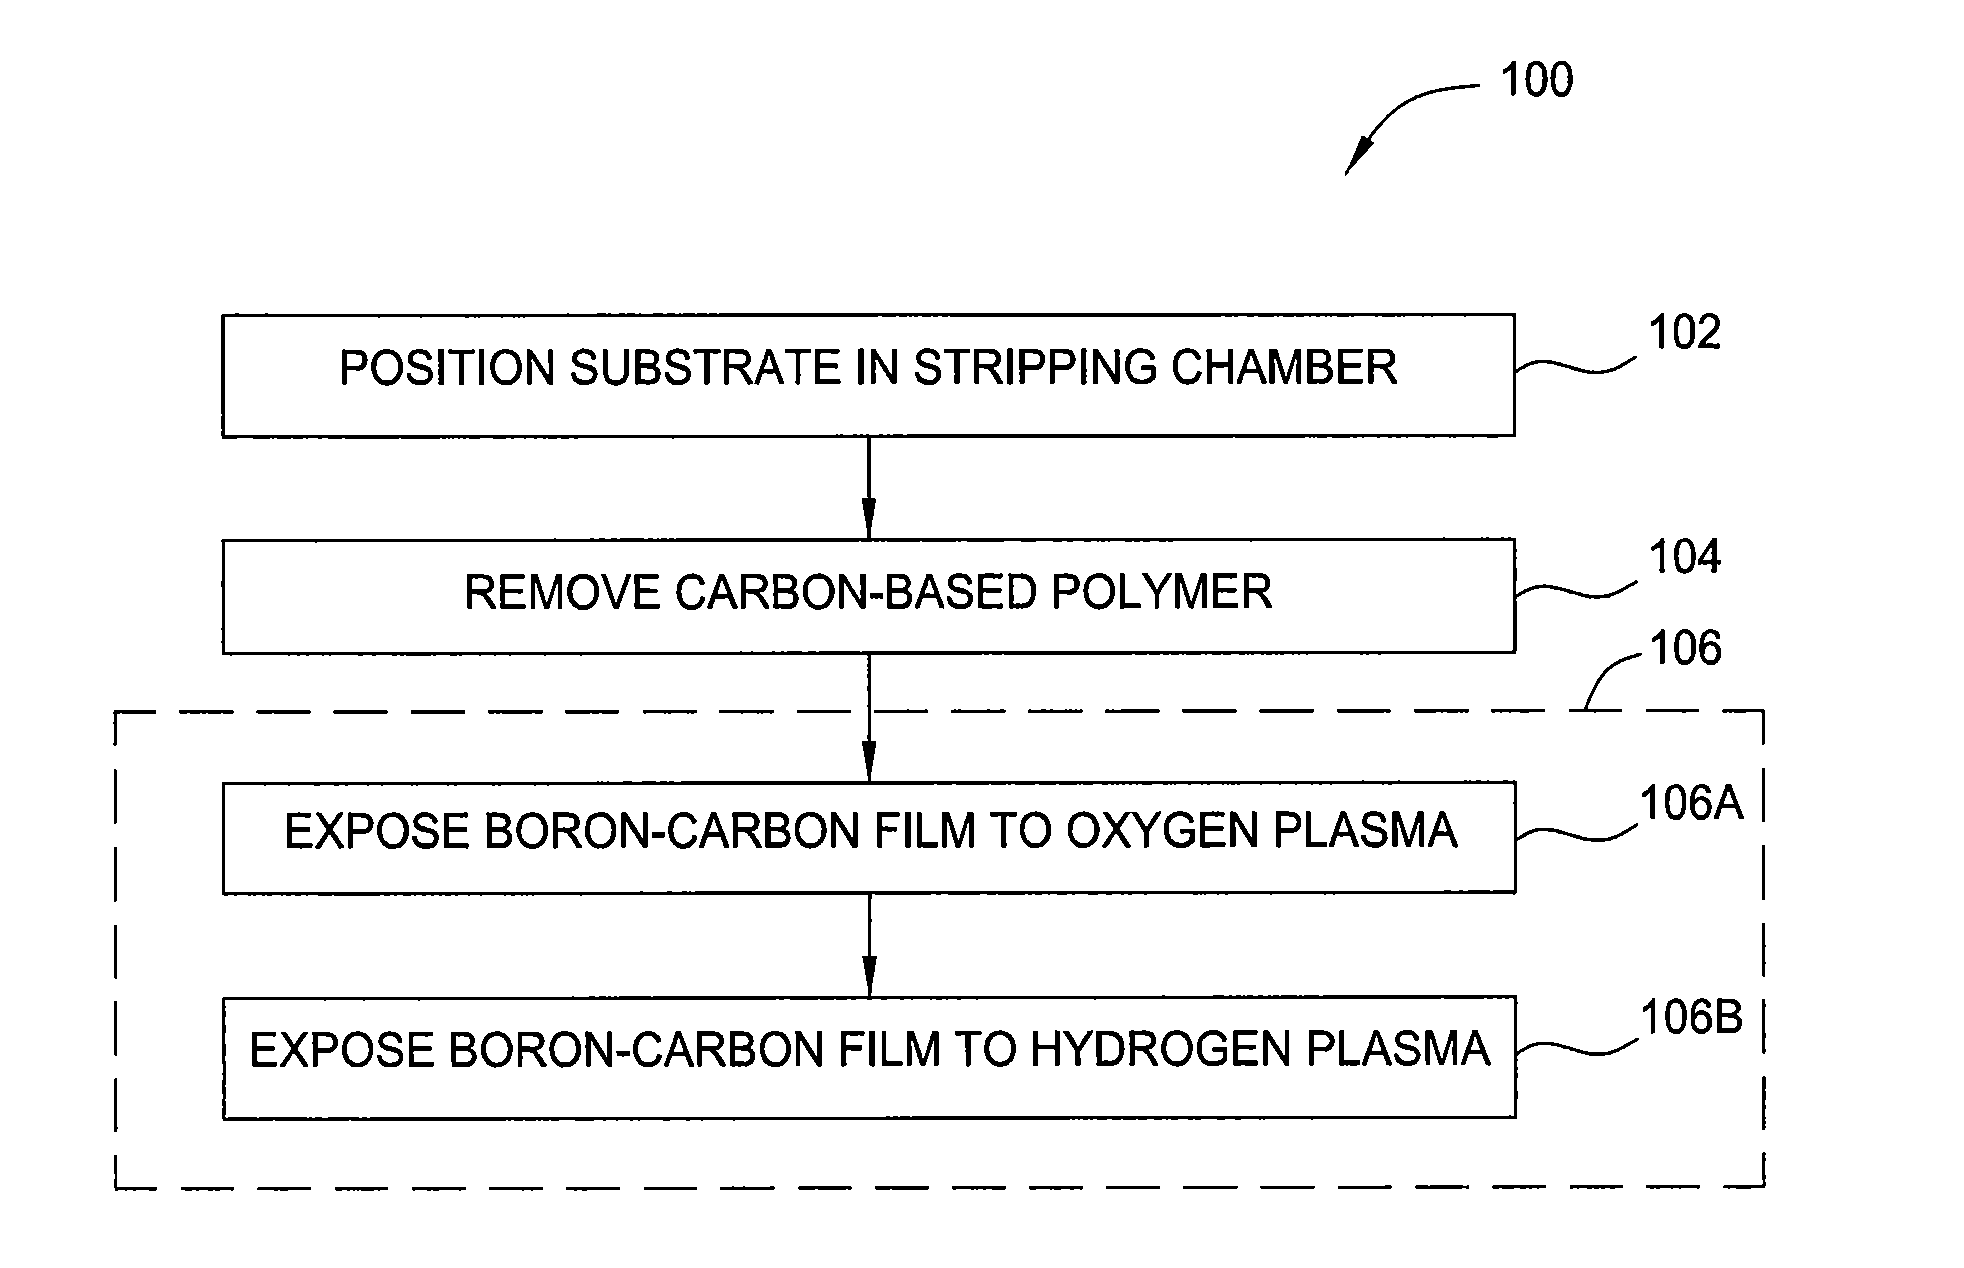 Methods of dry stripping boron-carbon films